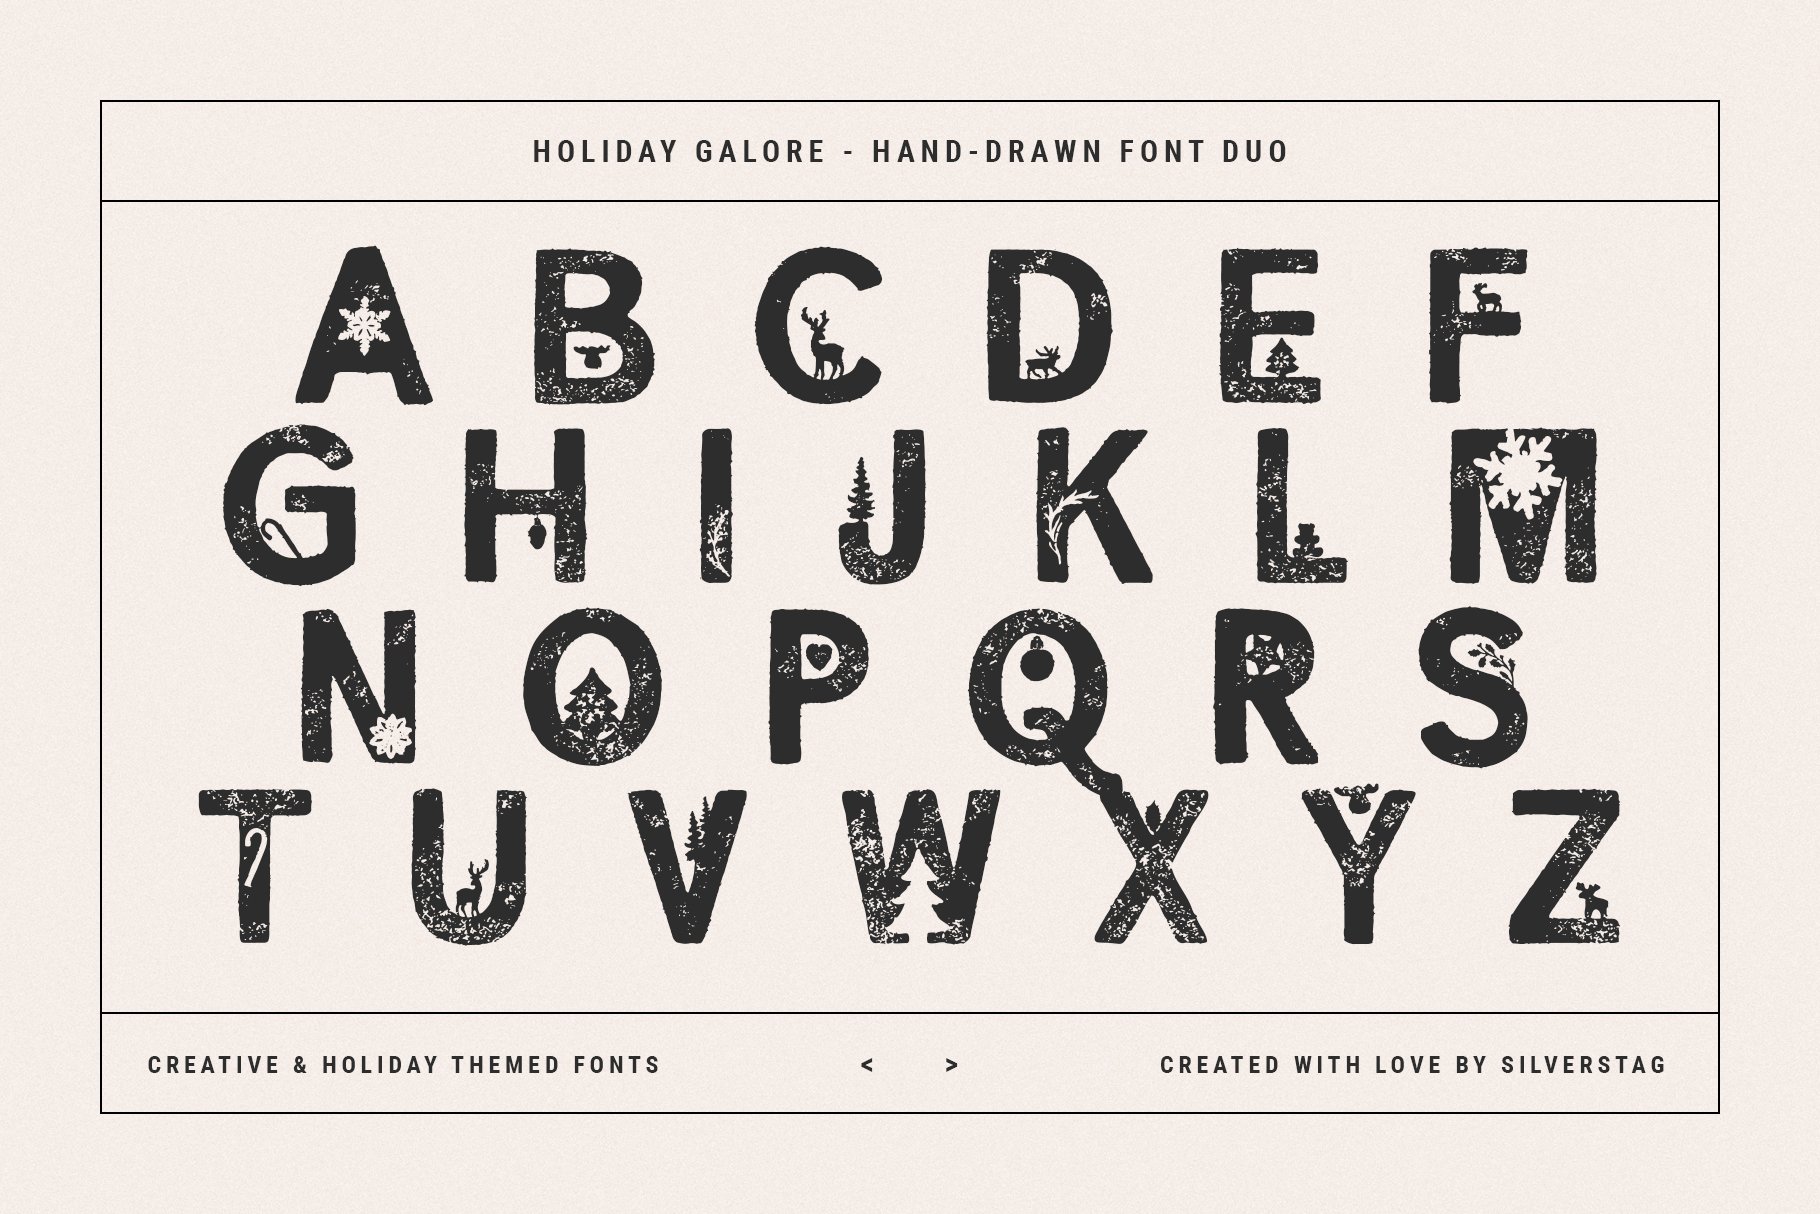 30 holiday galore font duo by silver stag 464